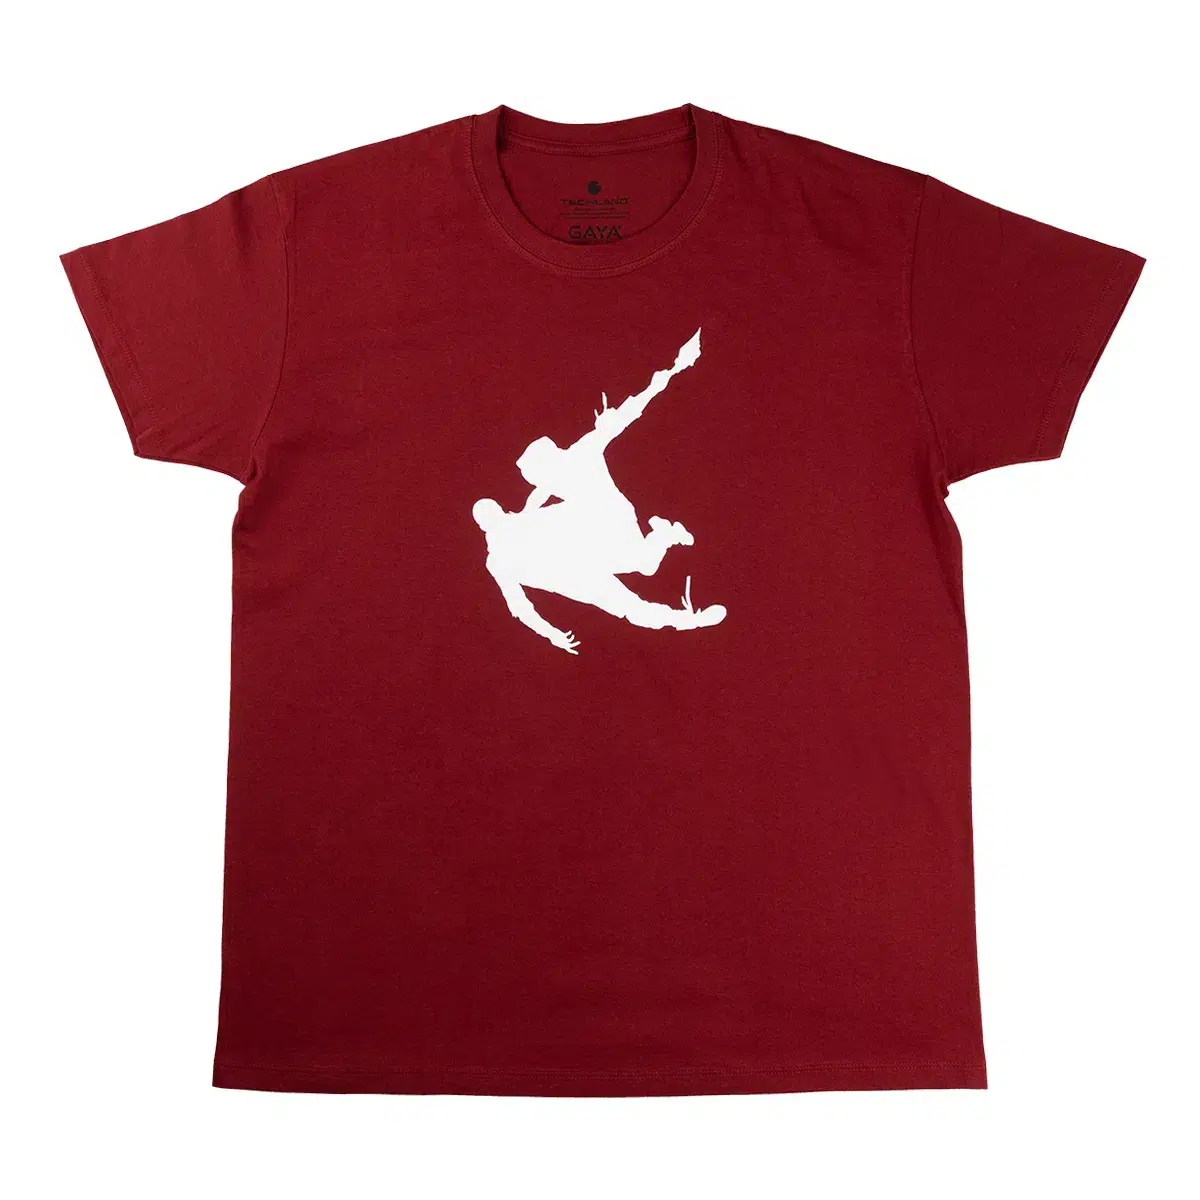 Dying Light 2 T-Shirt "Caldwell" Red S